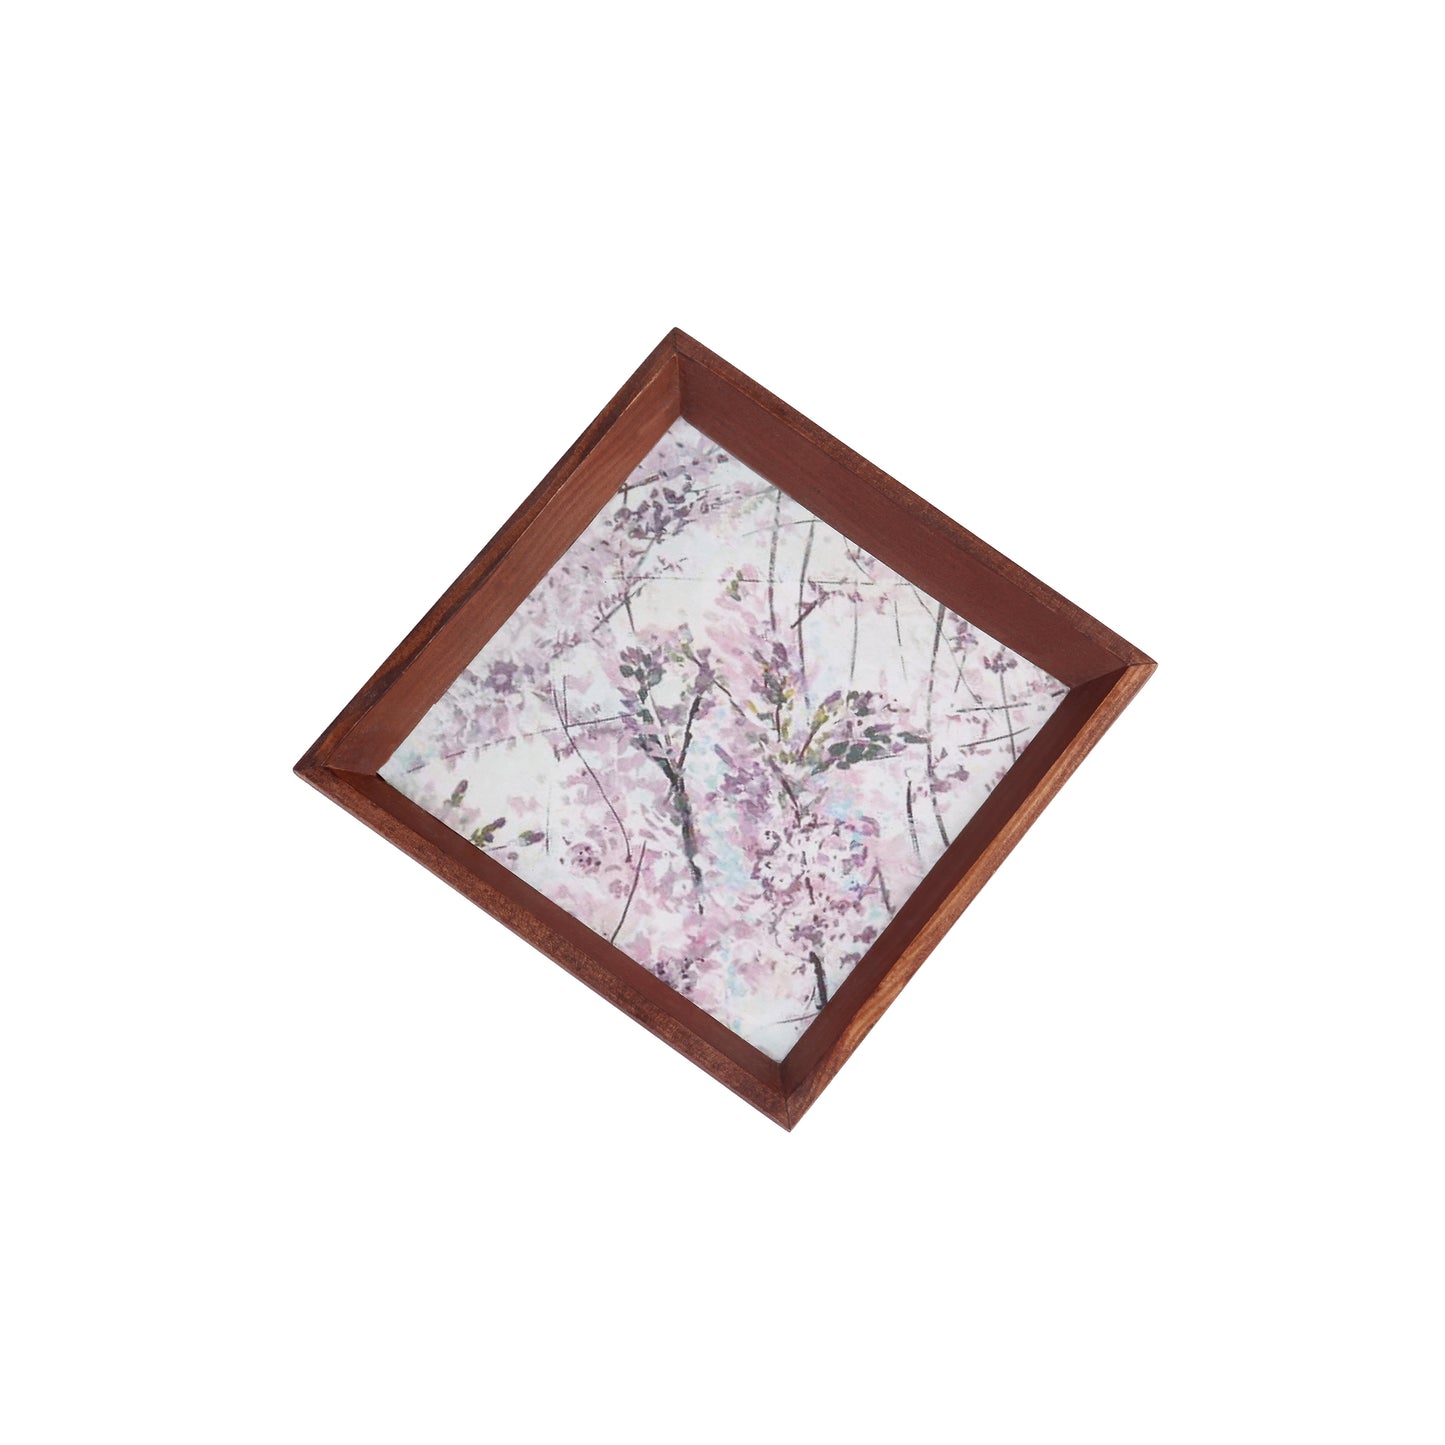 A Tiny Mistake Floral Caricature Trees Small Square Wooden Serving Tray, 18 x 18 x 2 cm